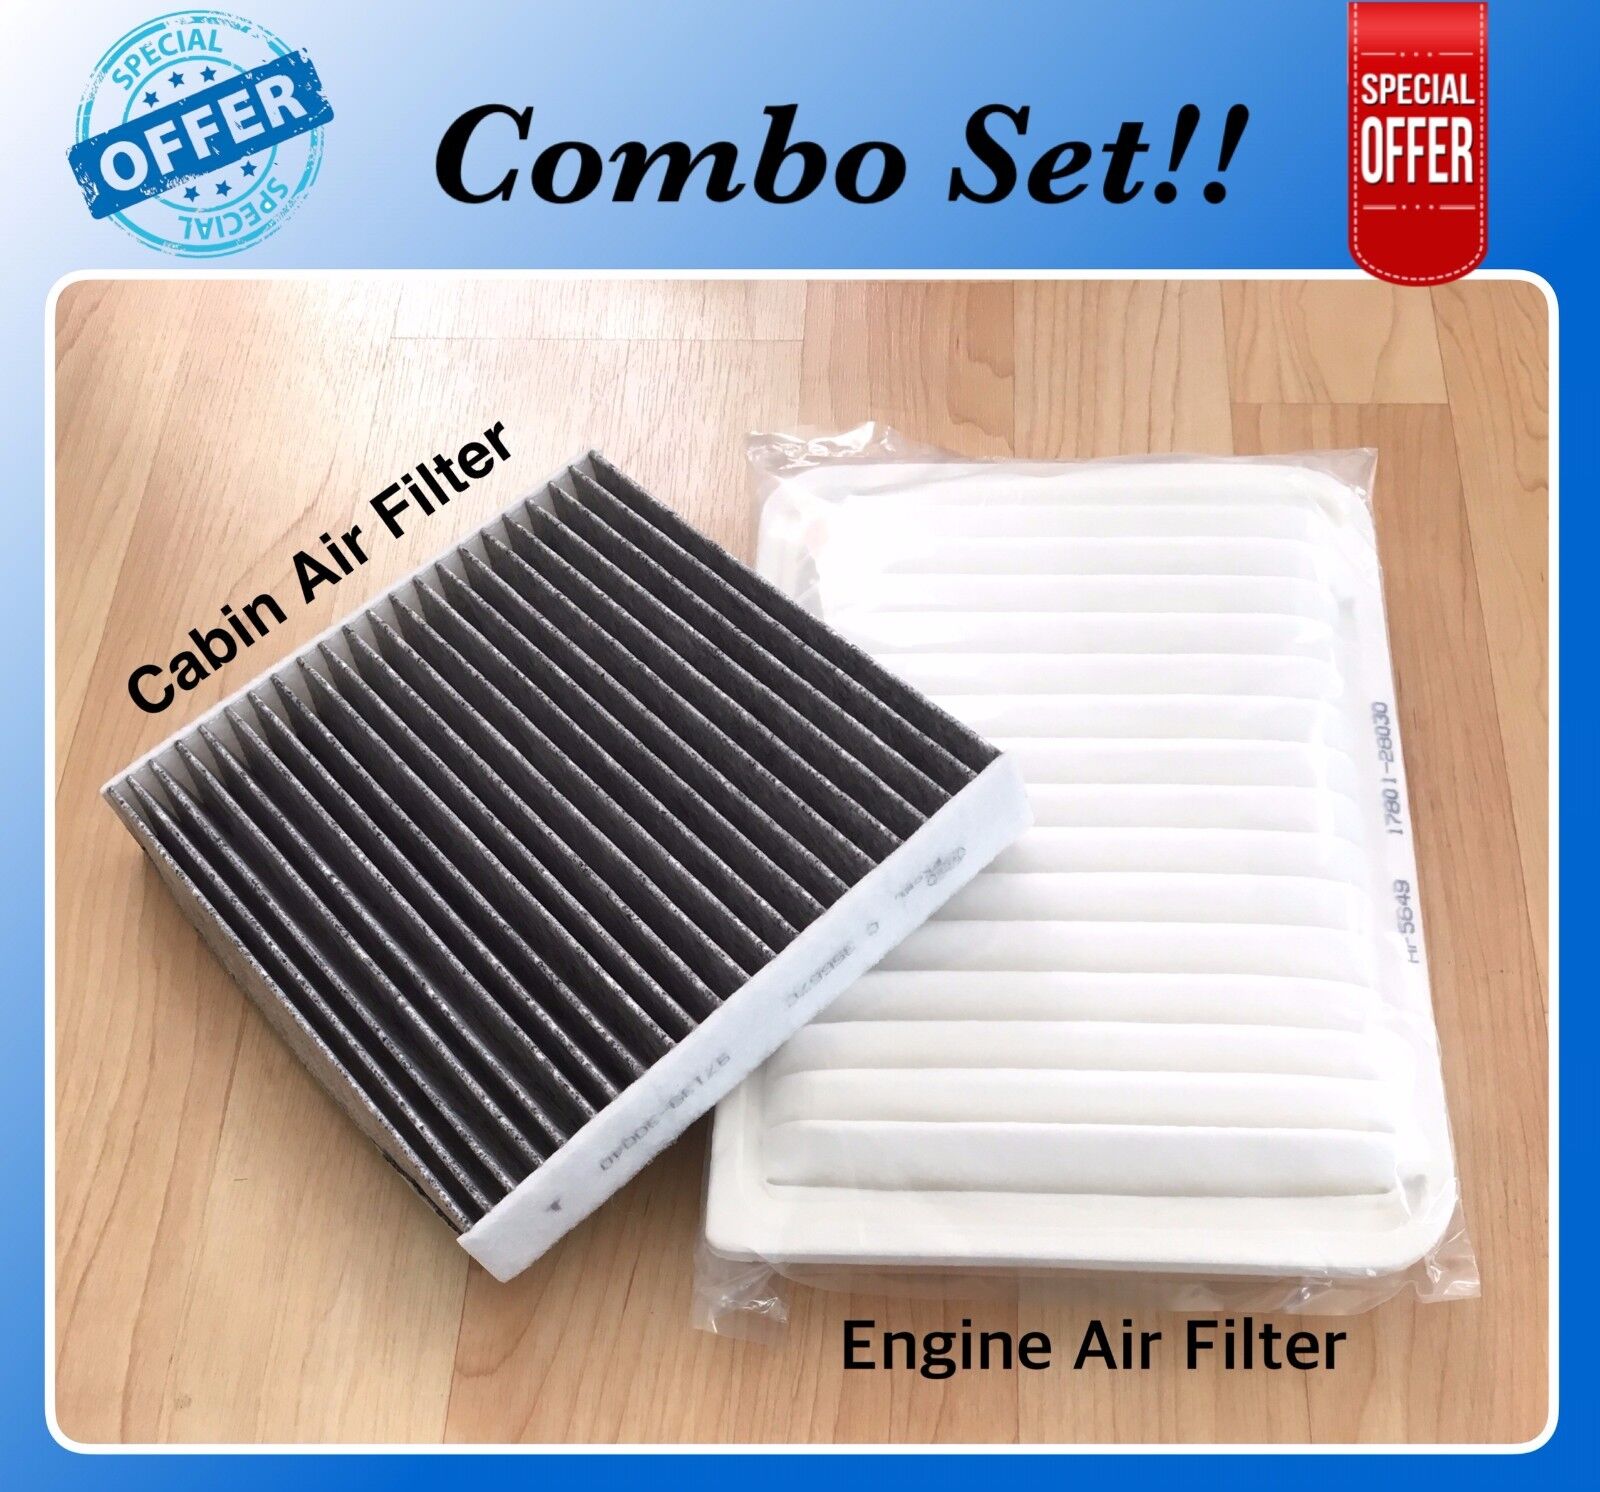 Engine & CARBONIZED Cabin Air Filter For CAMRY VENZA 4cyl 07-17 A5649 C35667